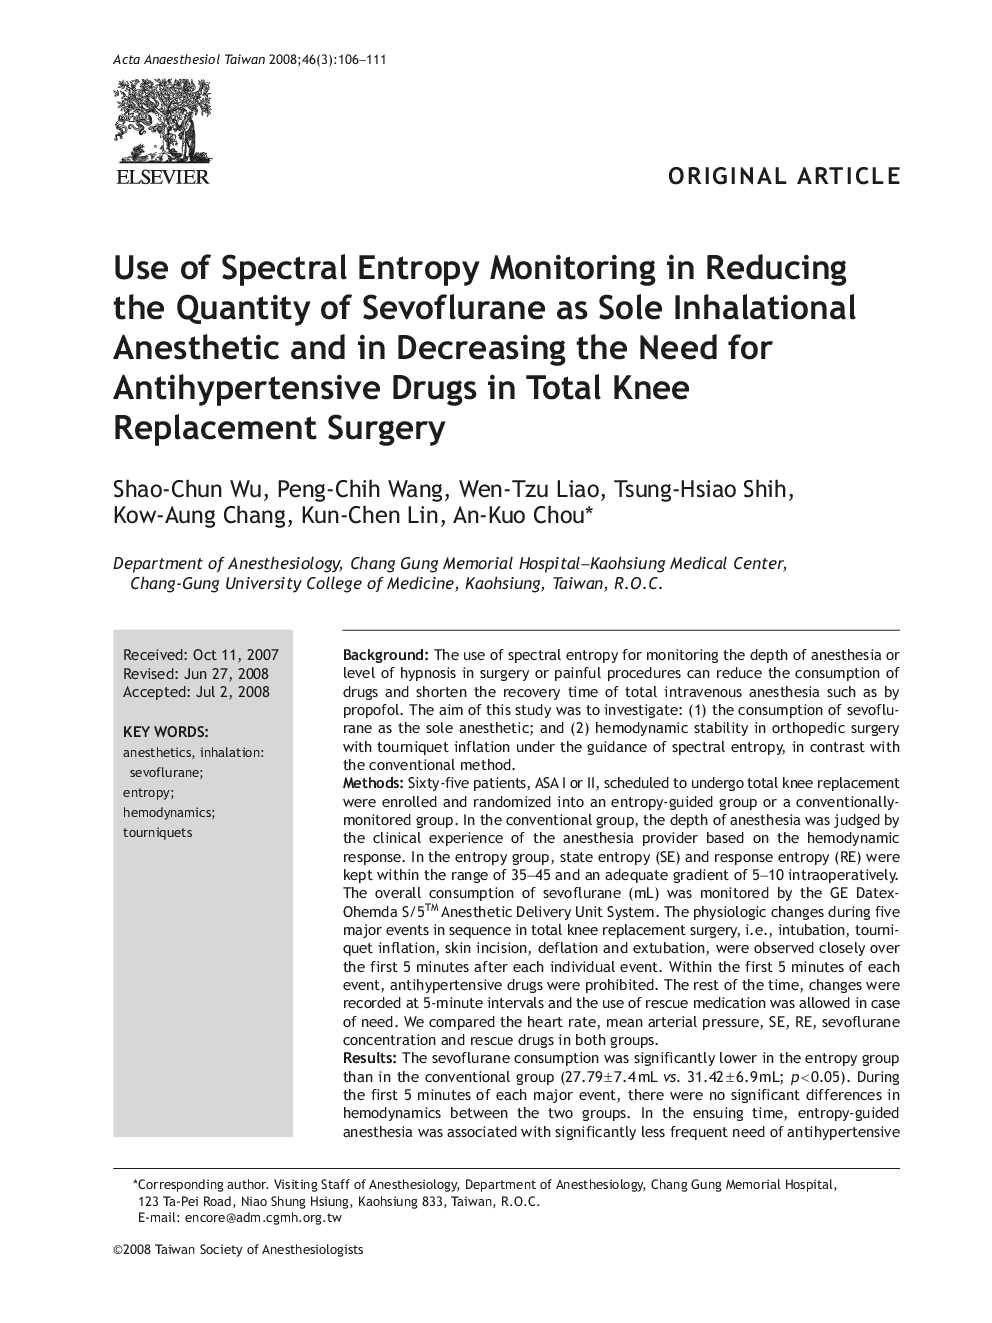 Use of Spectral Entropy Monitoring in Reducing the Quantity of Sevoflurane as Sole Inhalational Anesthetic and in Decreasing the Need for Antihypertensive Drugs in Total Knee Replacement Surgery